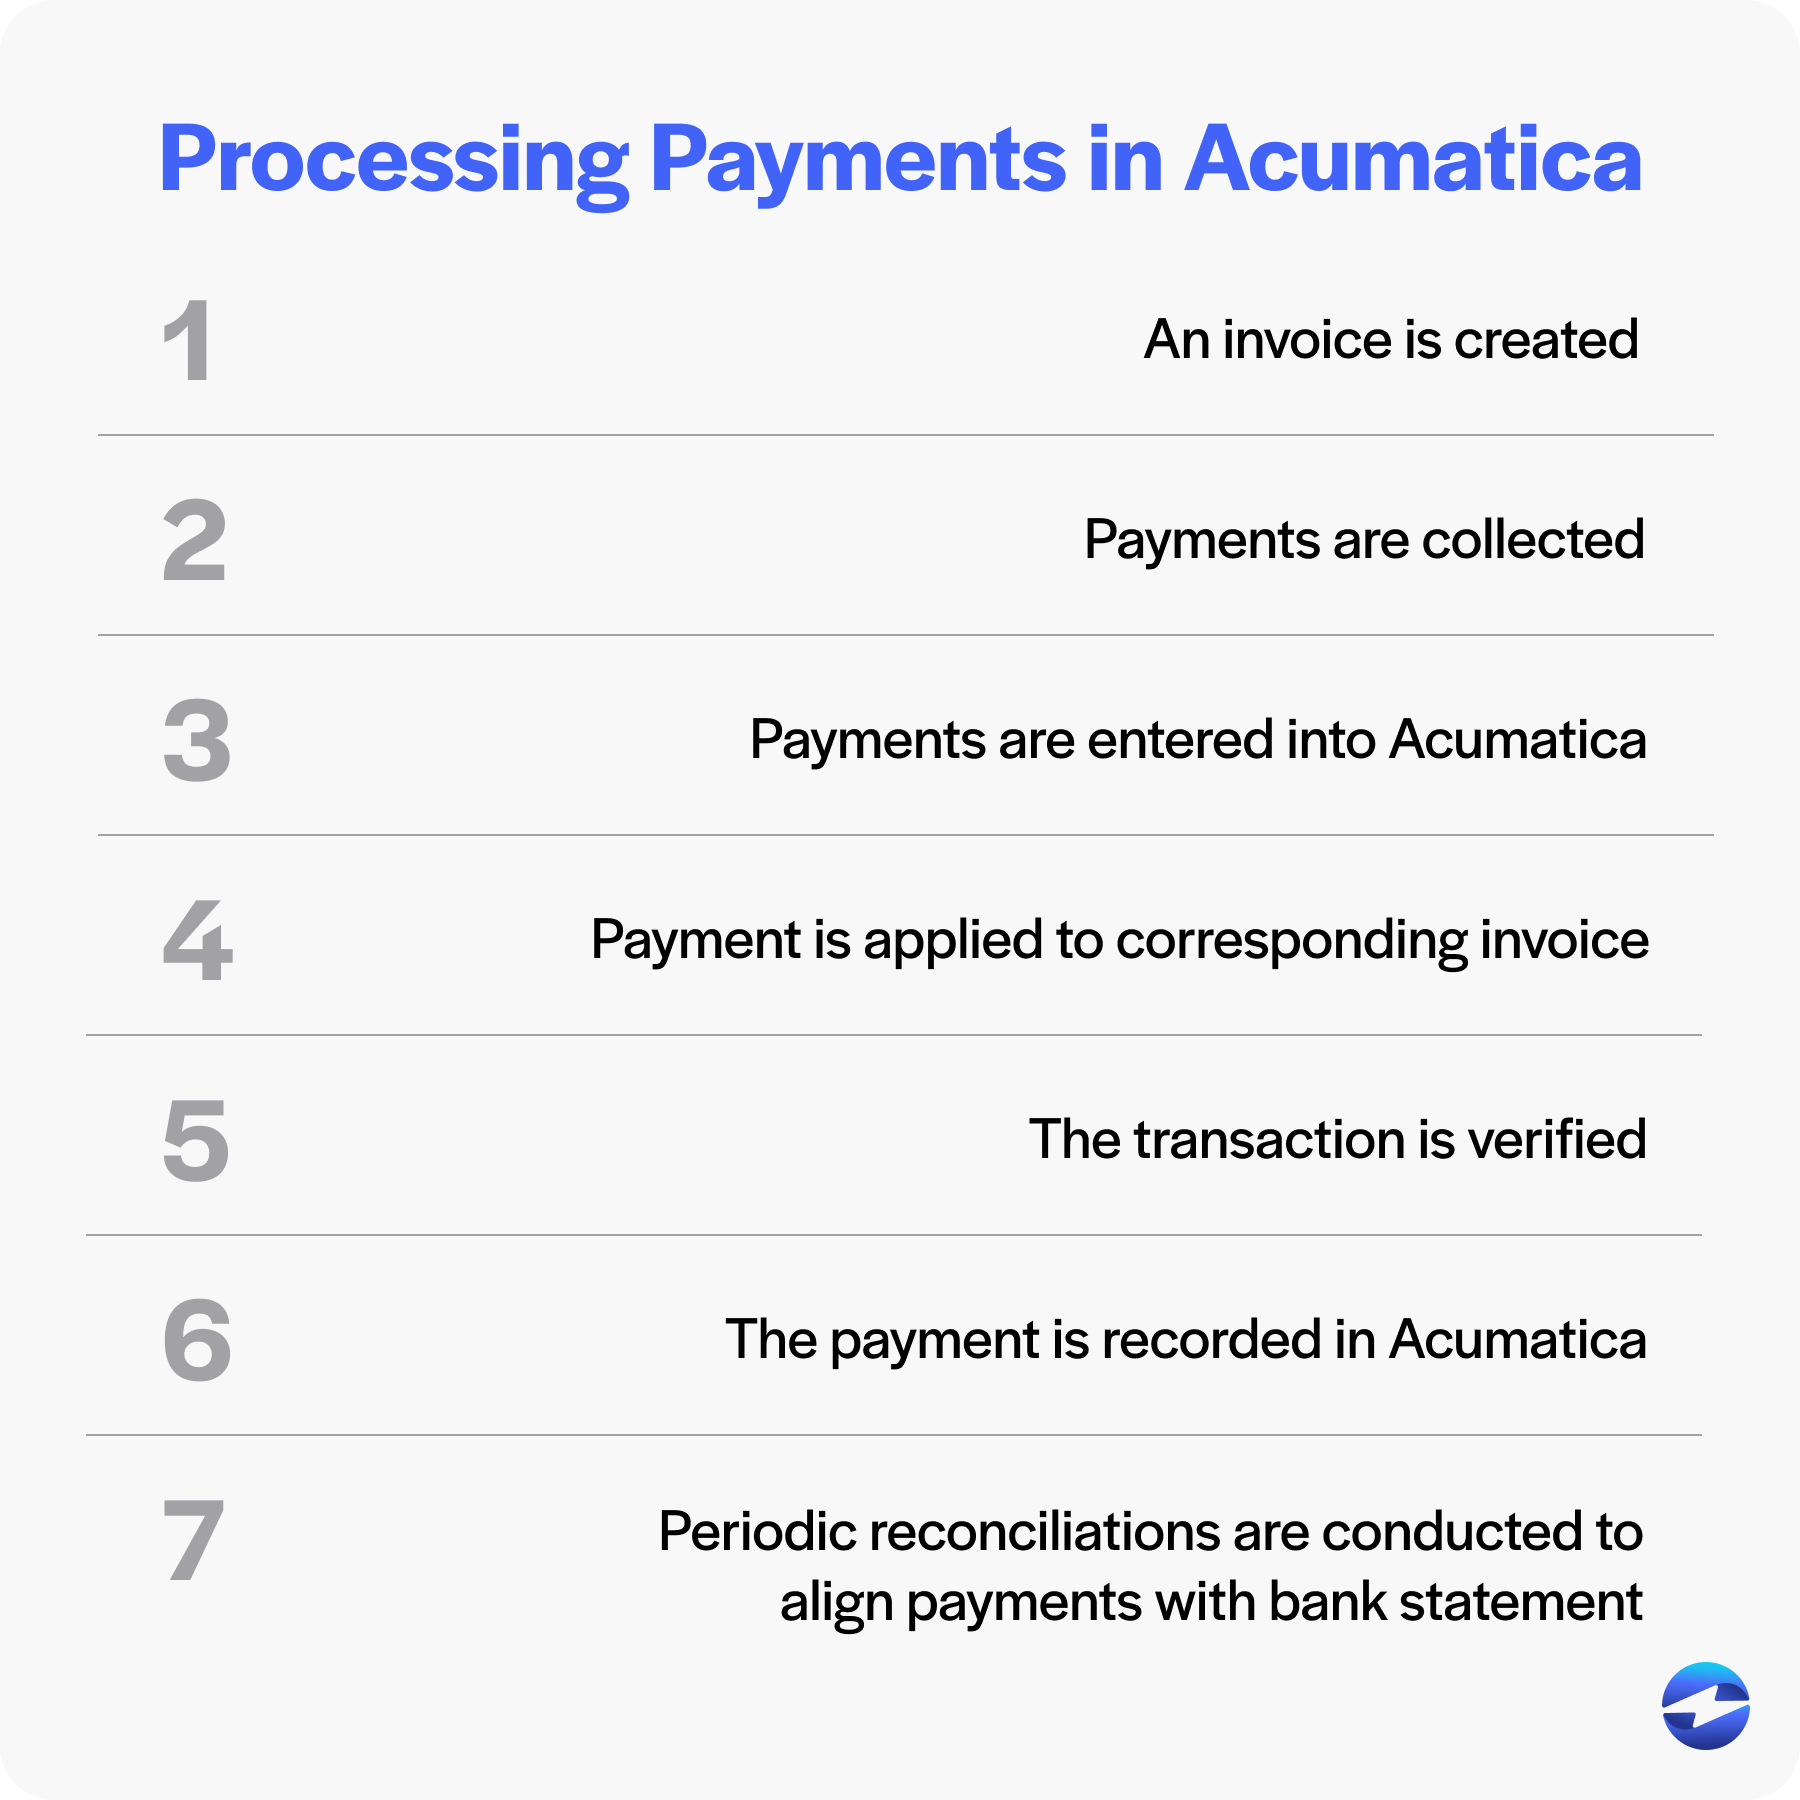 Acumatica payment processing